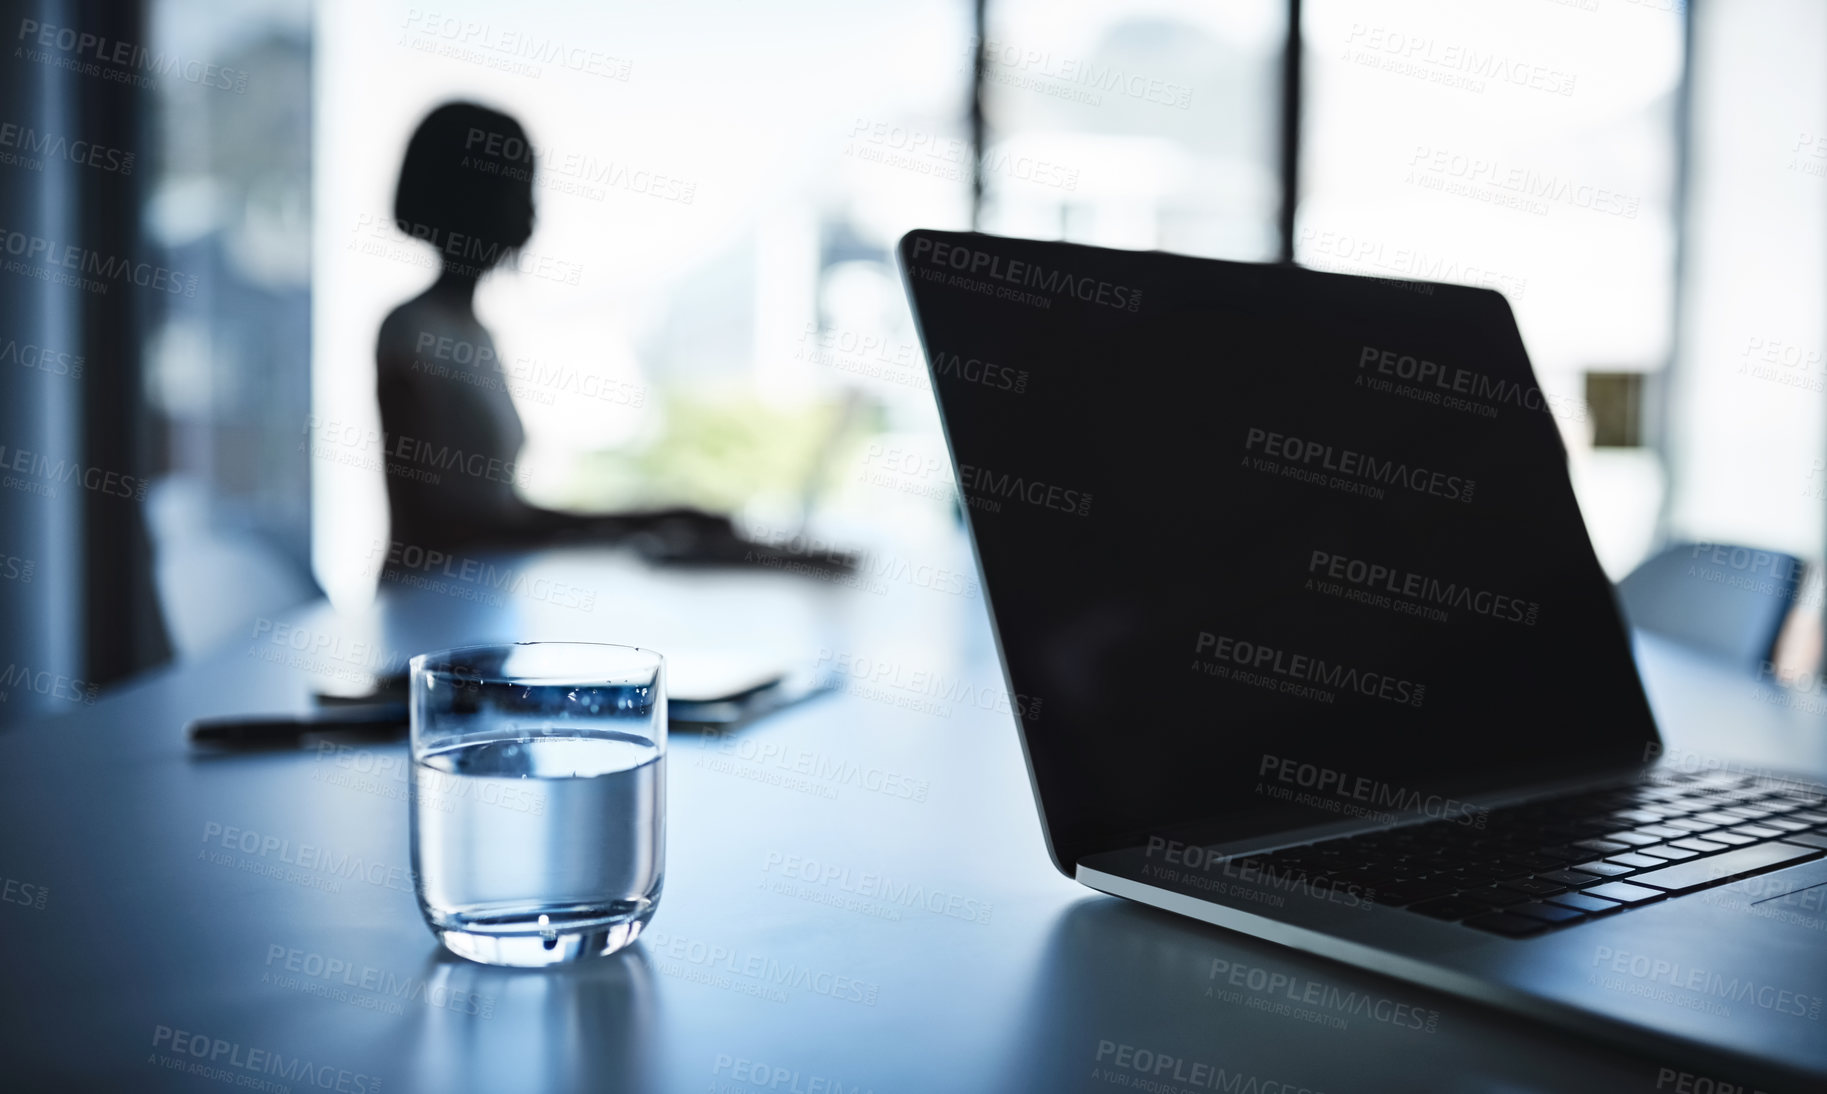 Buy stock photo Cropped shot of a laptop and a glass of water on a boardroom table with a businesswoman in the background